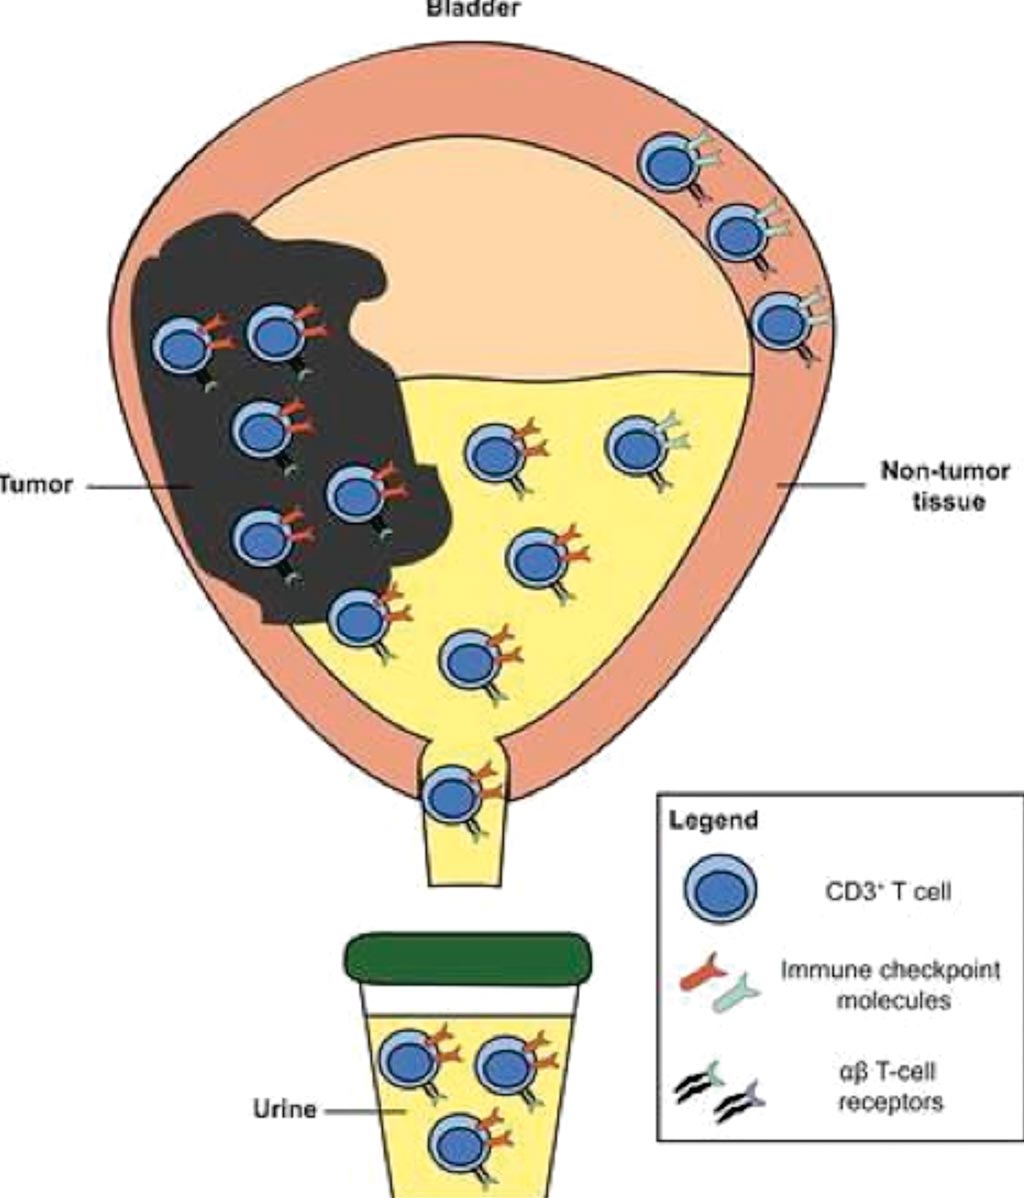 Image: A diagram of urine-derived lymphocytes as a non-invasive measure of the bladder tumor immune microenvironment (Photo courtesy of University College London).